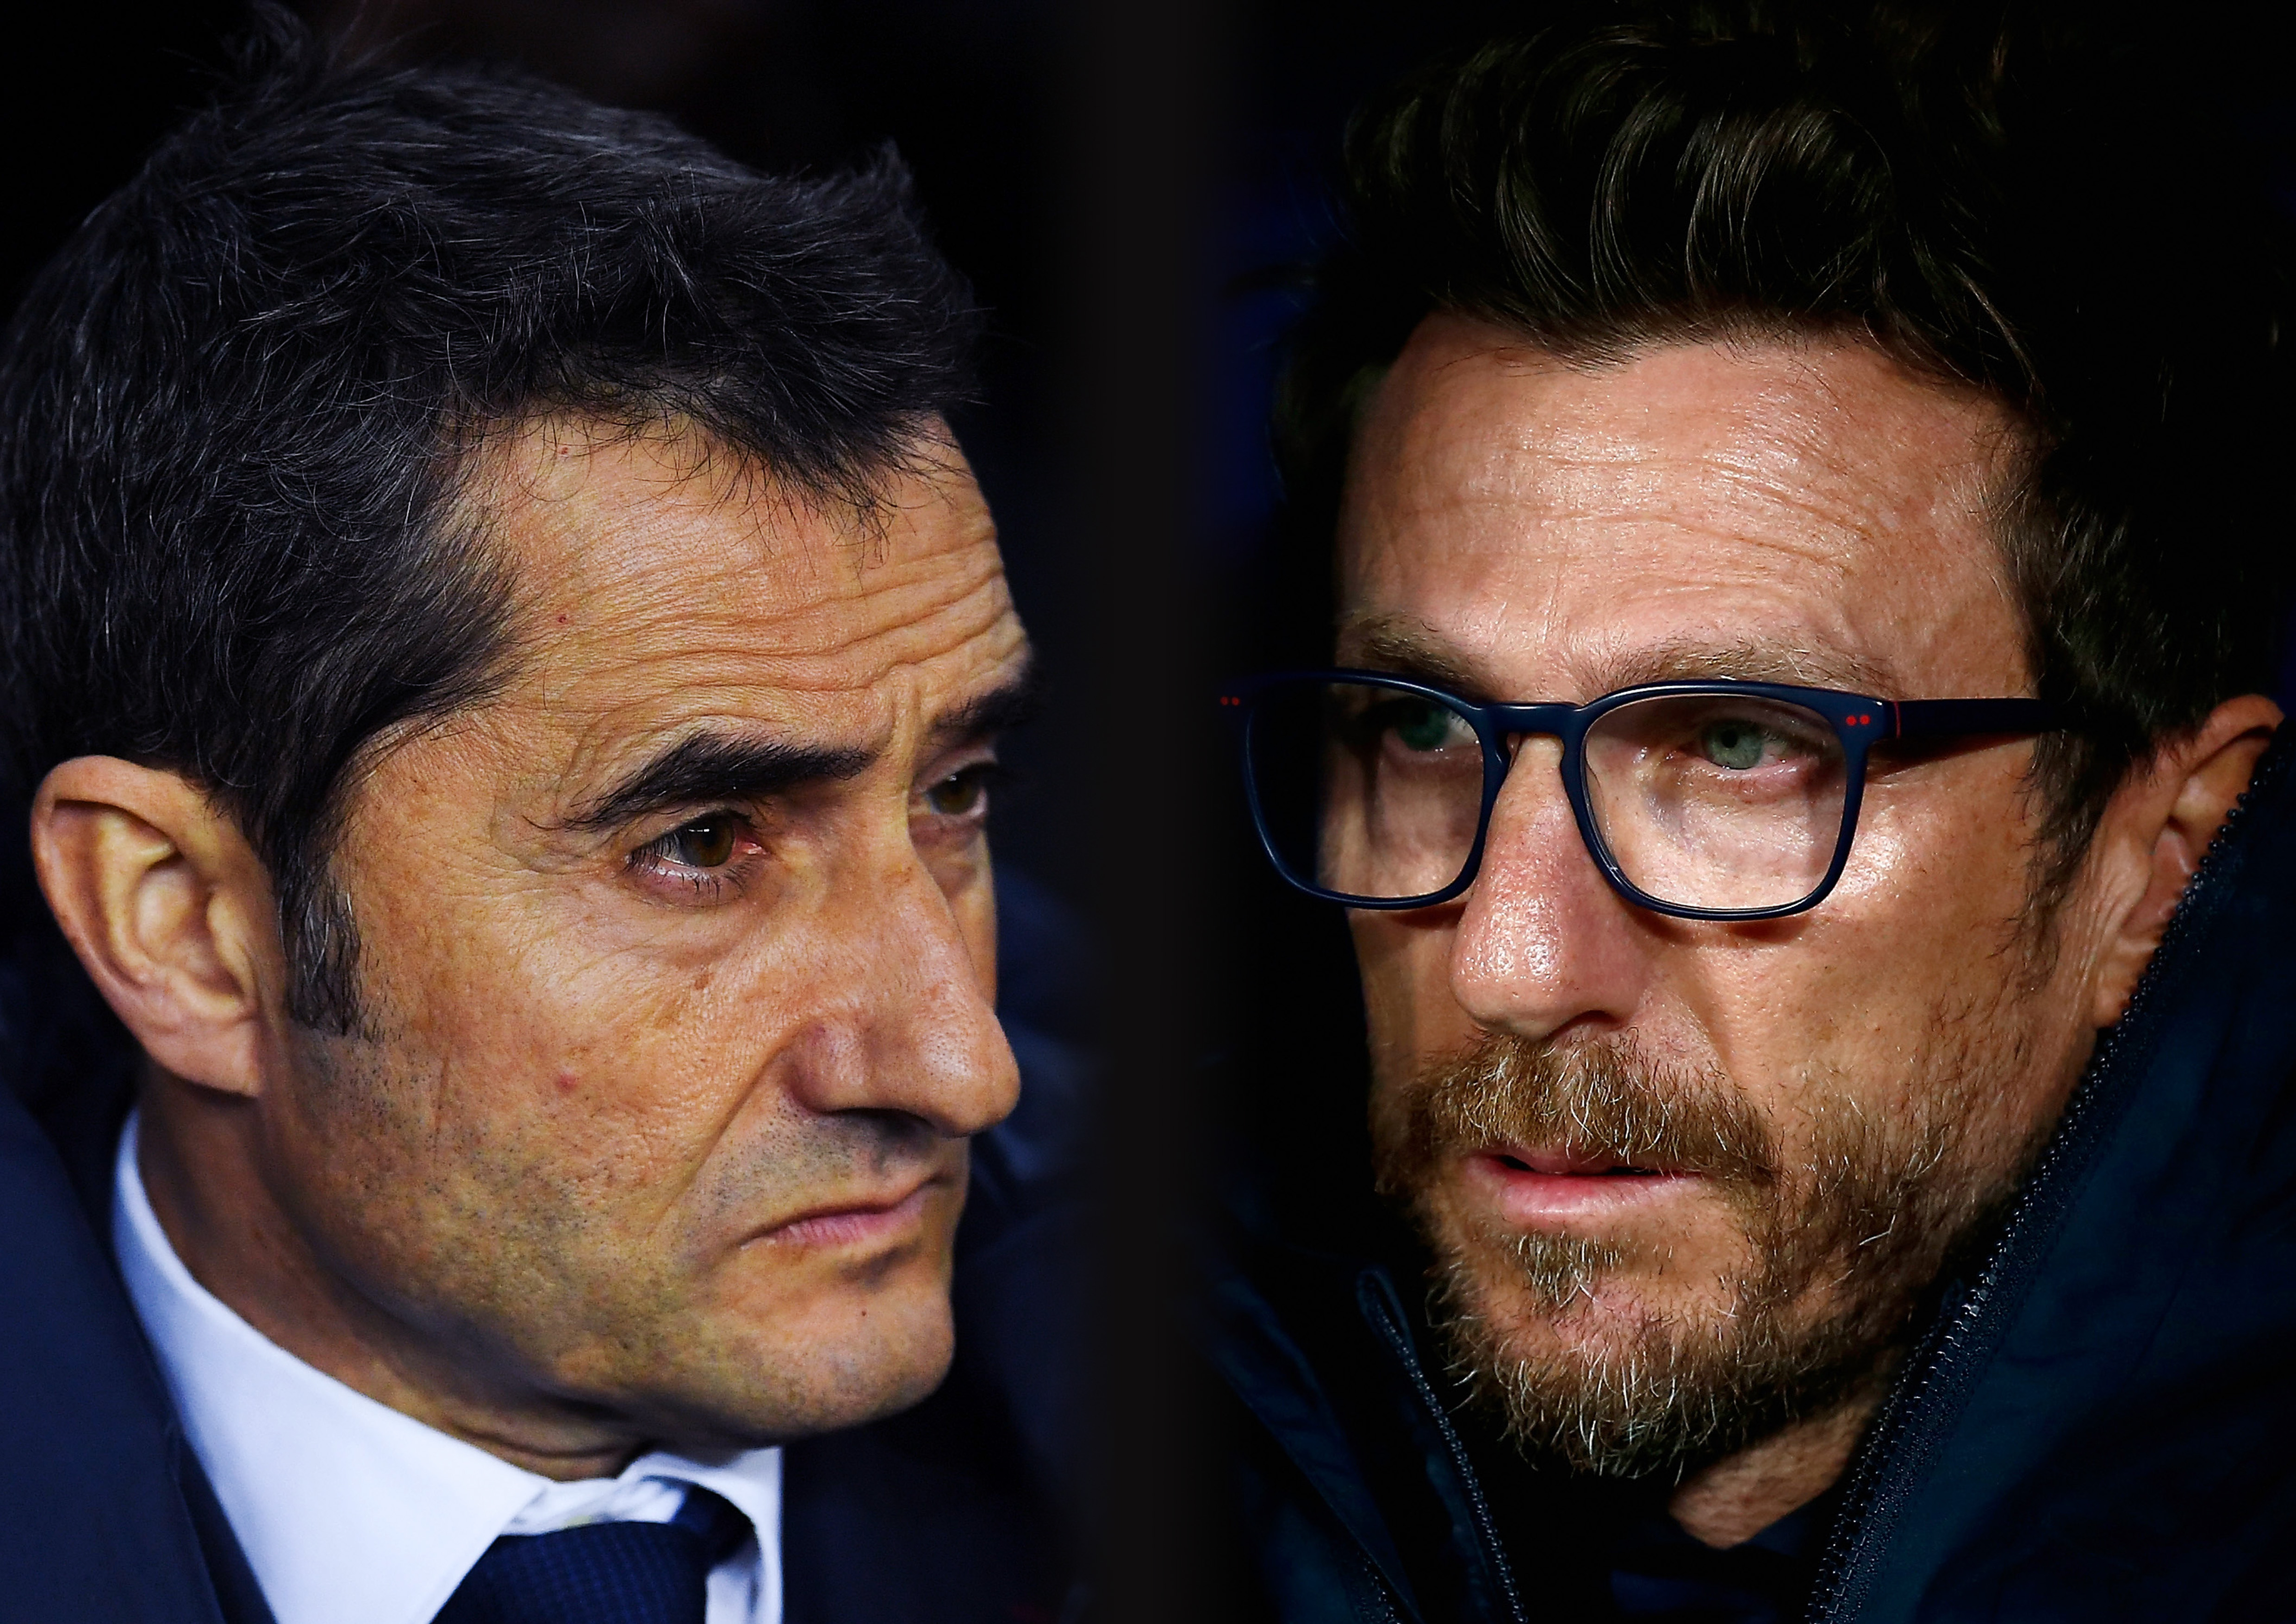 FILE PHOTO (EDITORS NOTE: GRADIENT ADDED - COMPOSITE OF TWO IMAGES - Image numbers (L) 904100134  and 877562636) In this composite image a comparison has been made between Head coach Ernesto Valverde of FC Barcelona (L) and Eusebio Di Francesco, coach of AS Roma. FC Barcelona and  AS Roma meet in a UEFA Champions League Quarter Final over two legs.   ***LEFT IMAGE*** BARCELONA, SPAIN - JANUARY 11: Head coach Ernesto Valverde of FC Barcelona looks on during the Copa del Rey round of 16 second leg match between FC Barcelona and Celta de Vigo at Camp Nou on January 11, 2018 in Barcelona, Spain. (Photo by David Ramos/Getty Images) ***RIGHT IMAGE****  MADRID, SPAIN - NOVEMBER 22: Eusebio Di Francesco, coach of AS Roma looks on during the UEFA Champions League group C match between Atletico Madrid and AS Roma at Wanda Metropolitano on November 22, 2017 in Madrid, Spain. (Photo by Gonzalo Arroyo Moreno/Getty Images)